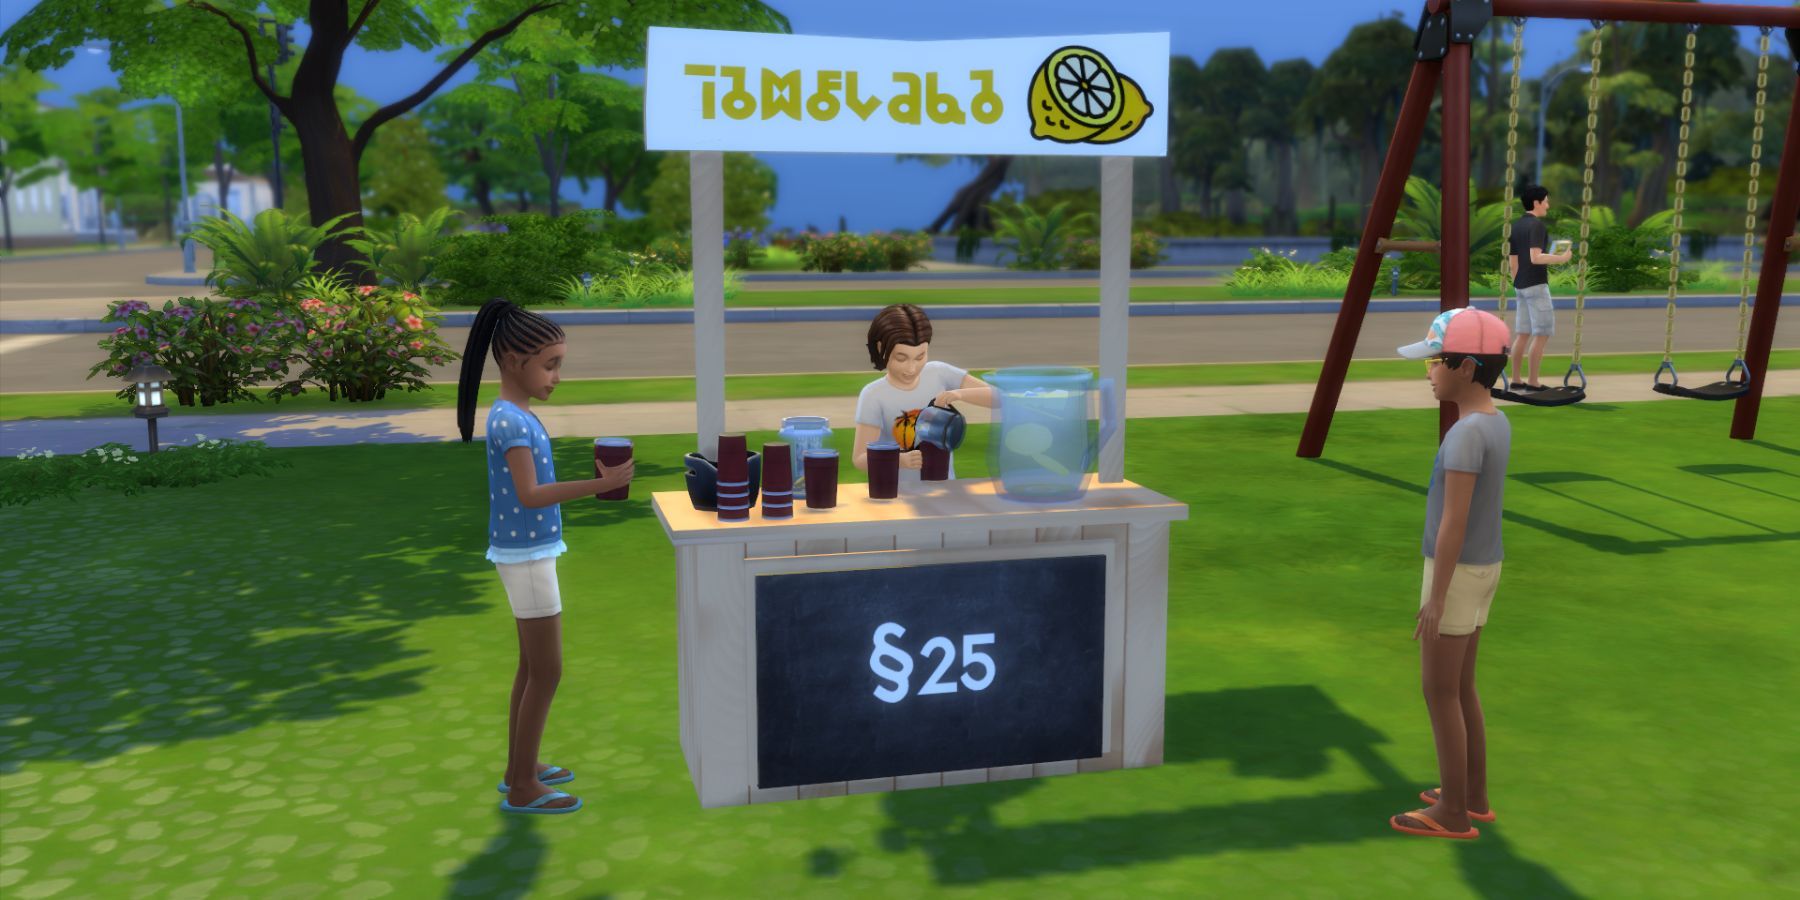 The Sims 4 Functional Lemonade Stand For Children Mod